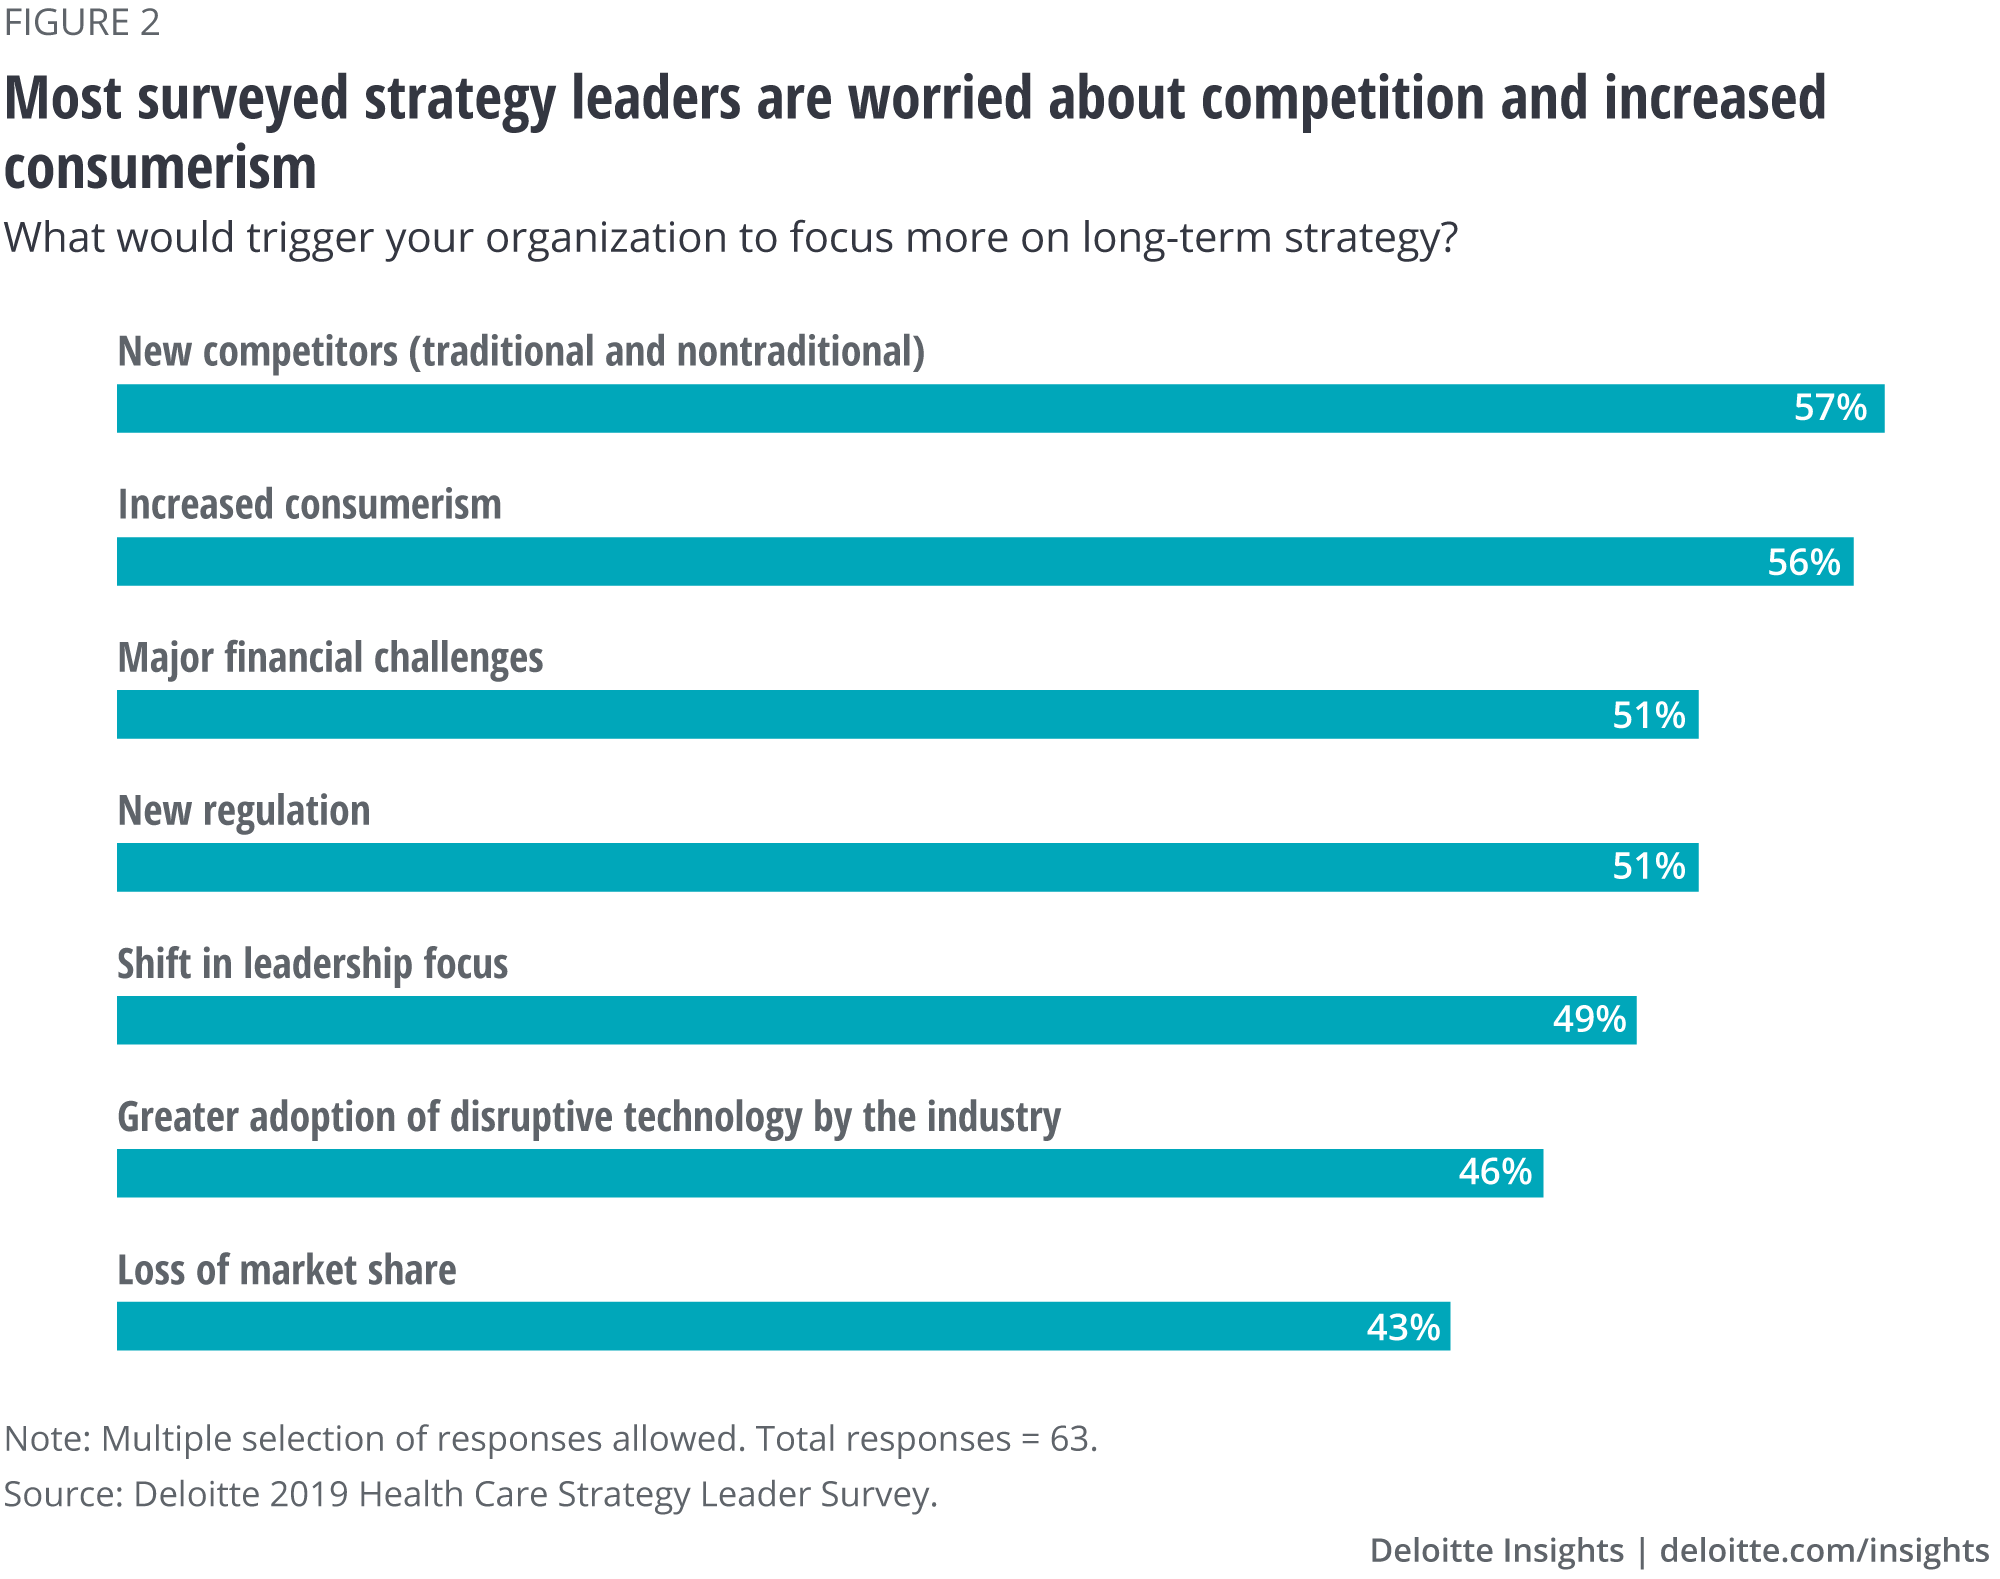 Most surveyed strategy leaders are worried about competition and increased consumerism